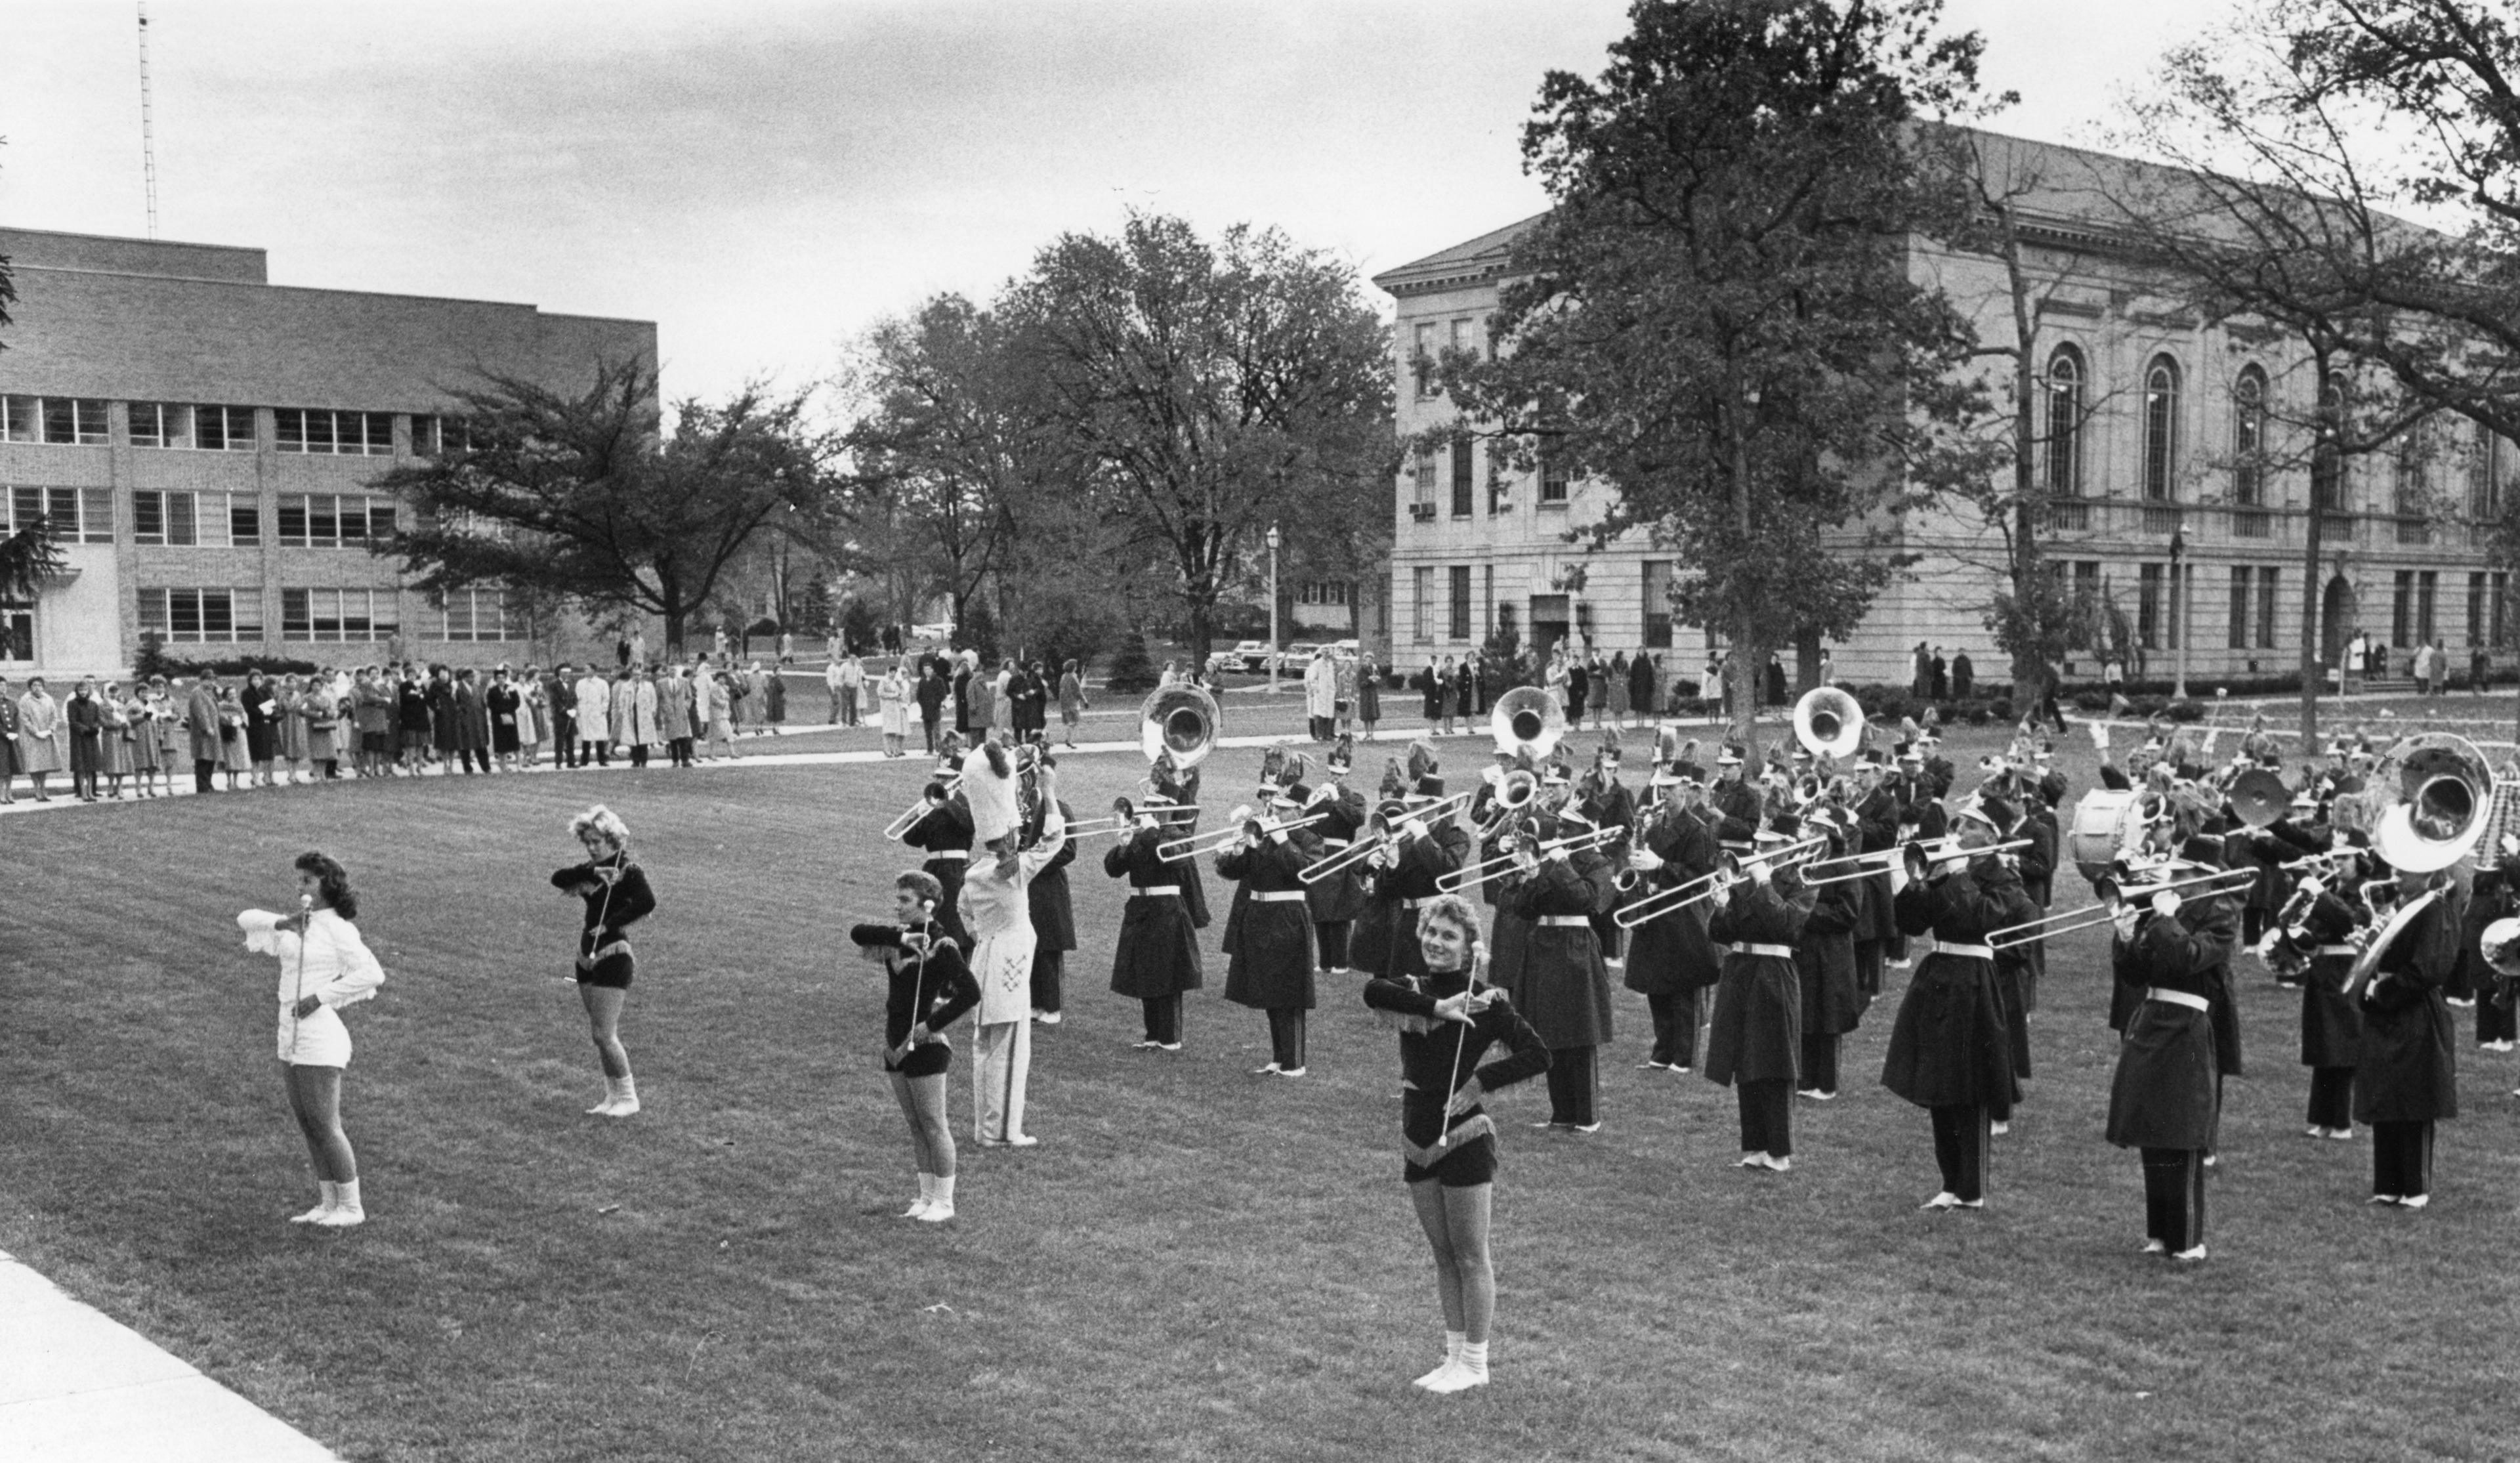 Falcon Marching Band members perform on the quad during the 1960 Homecoming